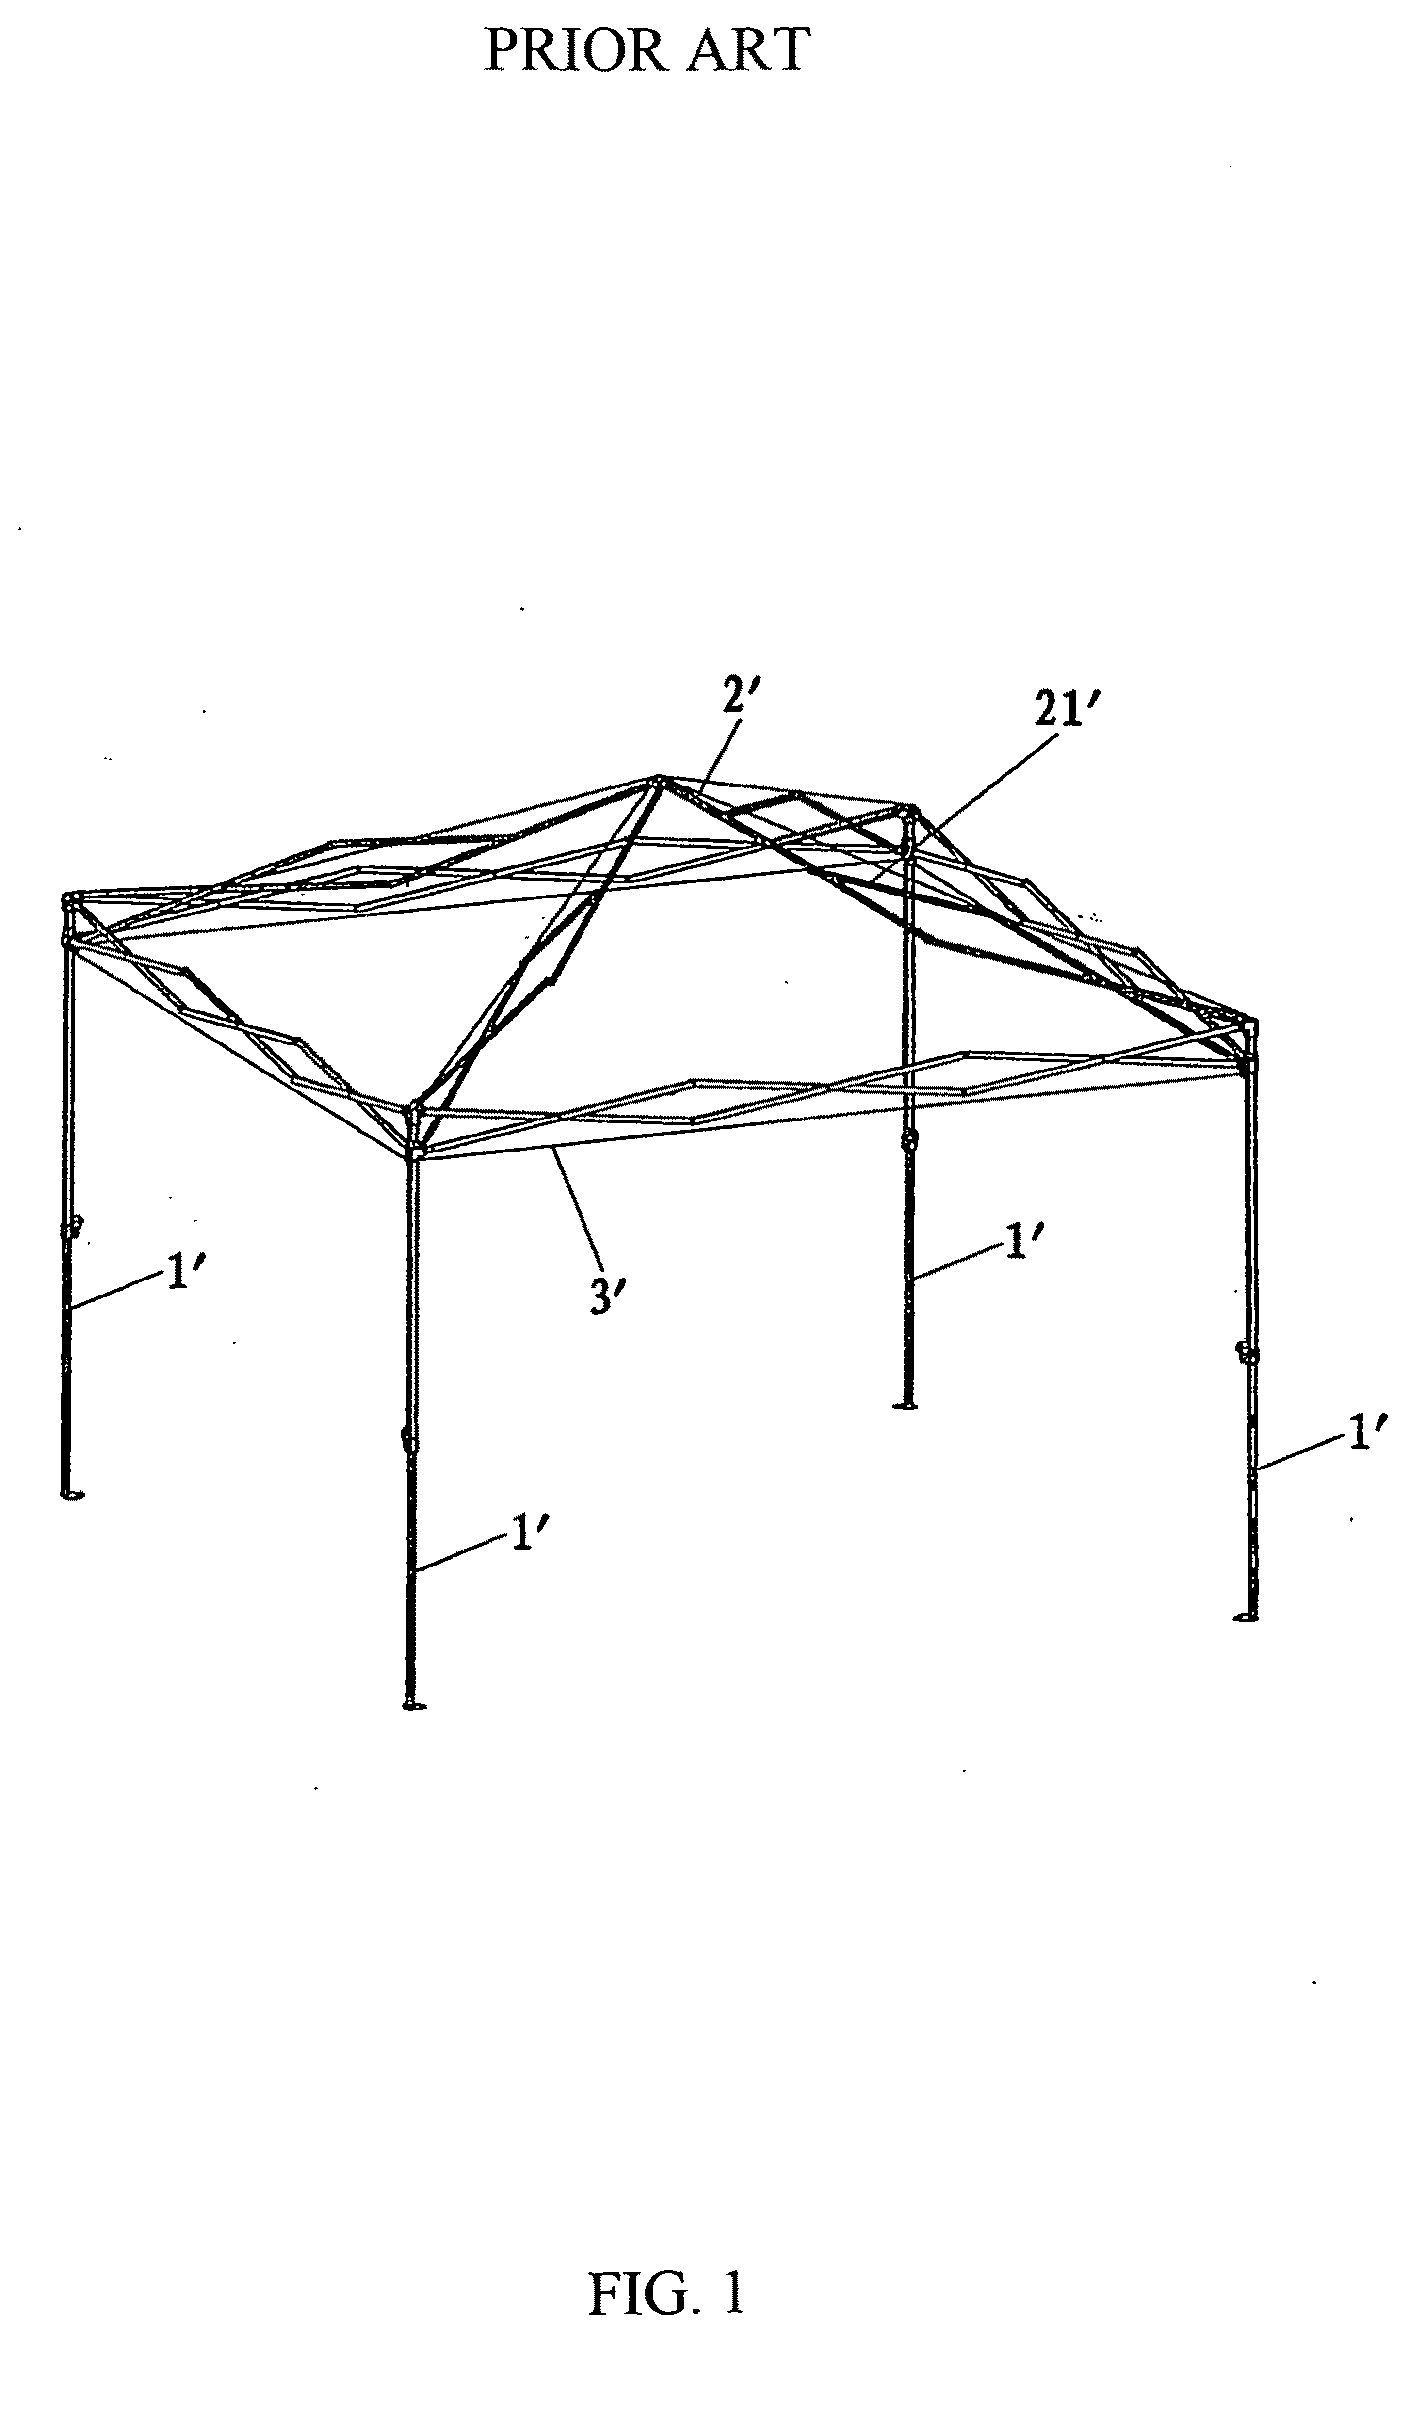 Collapsible tent frame with retractable eaves